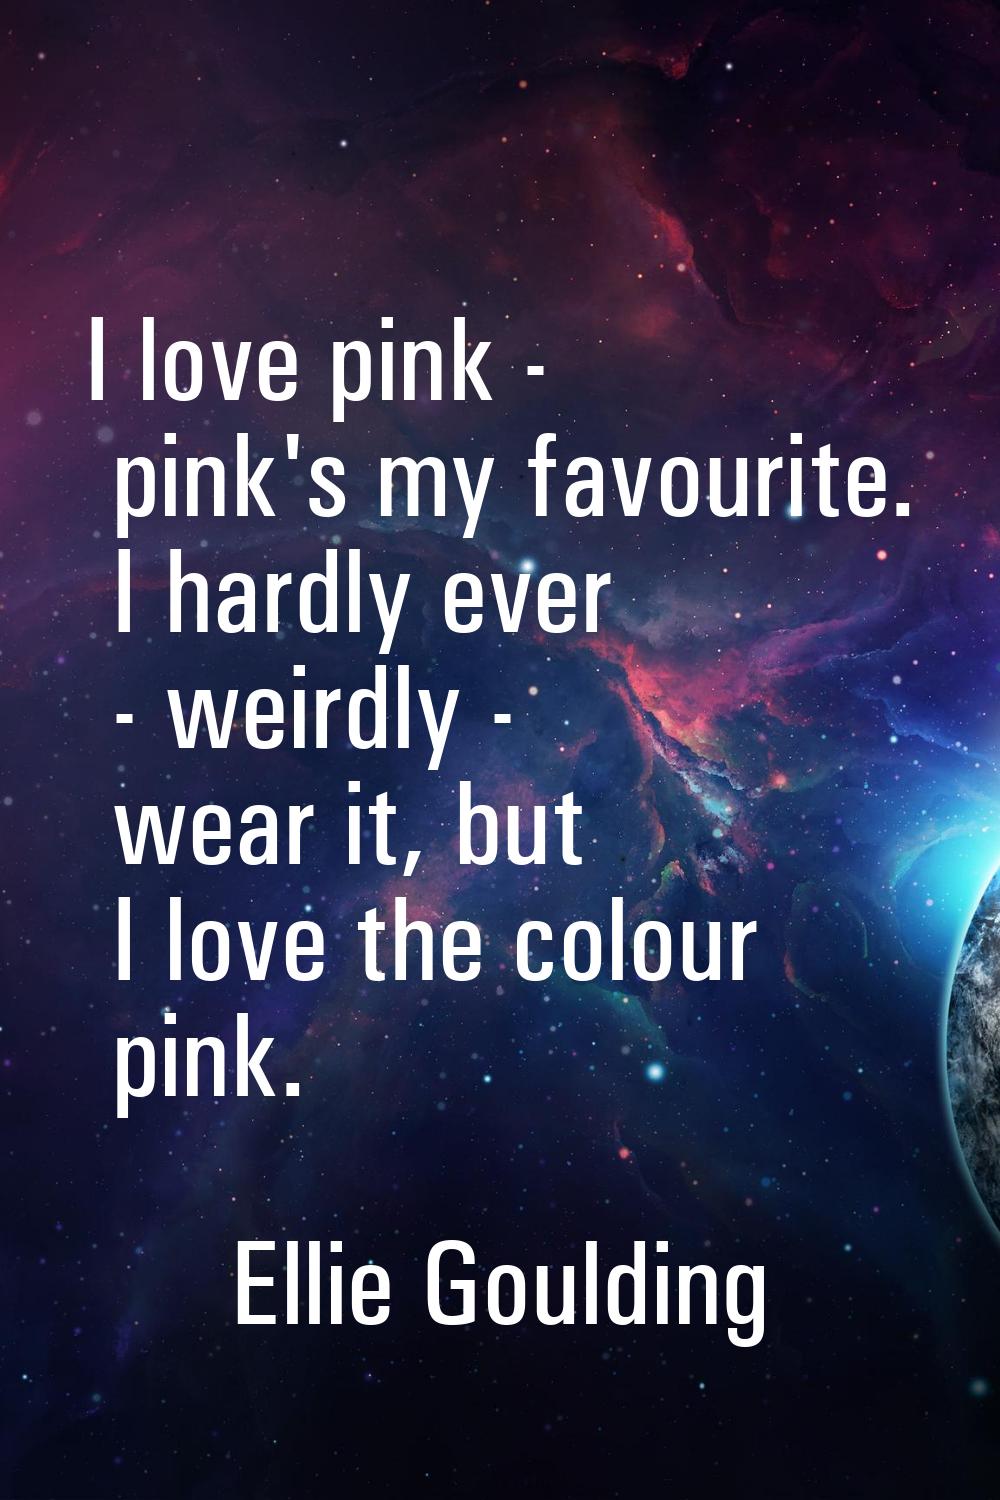 I love pink - pink's my favourite. I hardly ever - weirdly - wear it, but I love the colour pink.